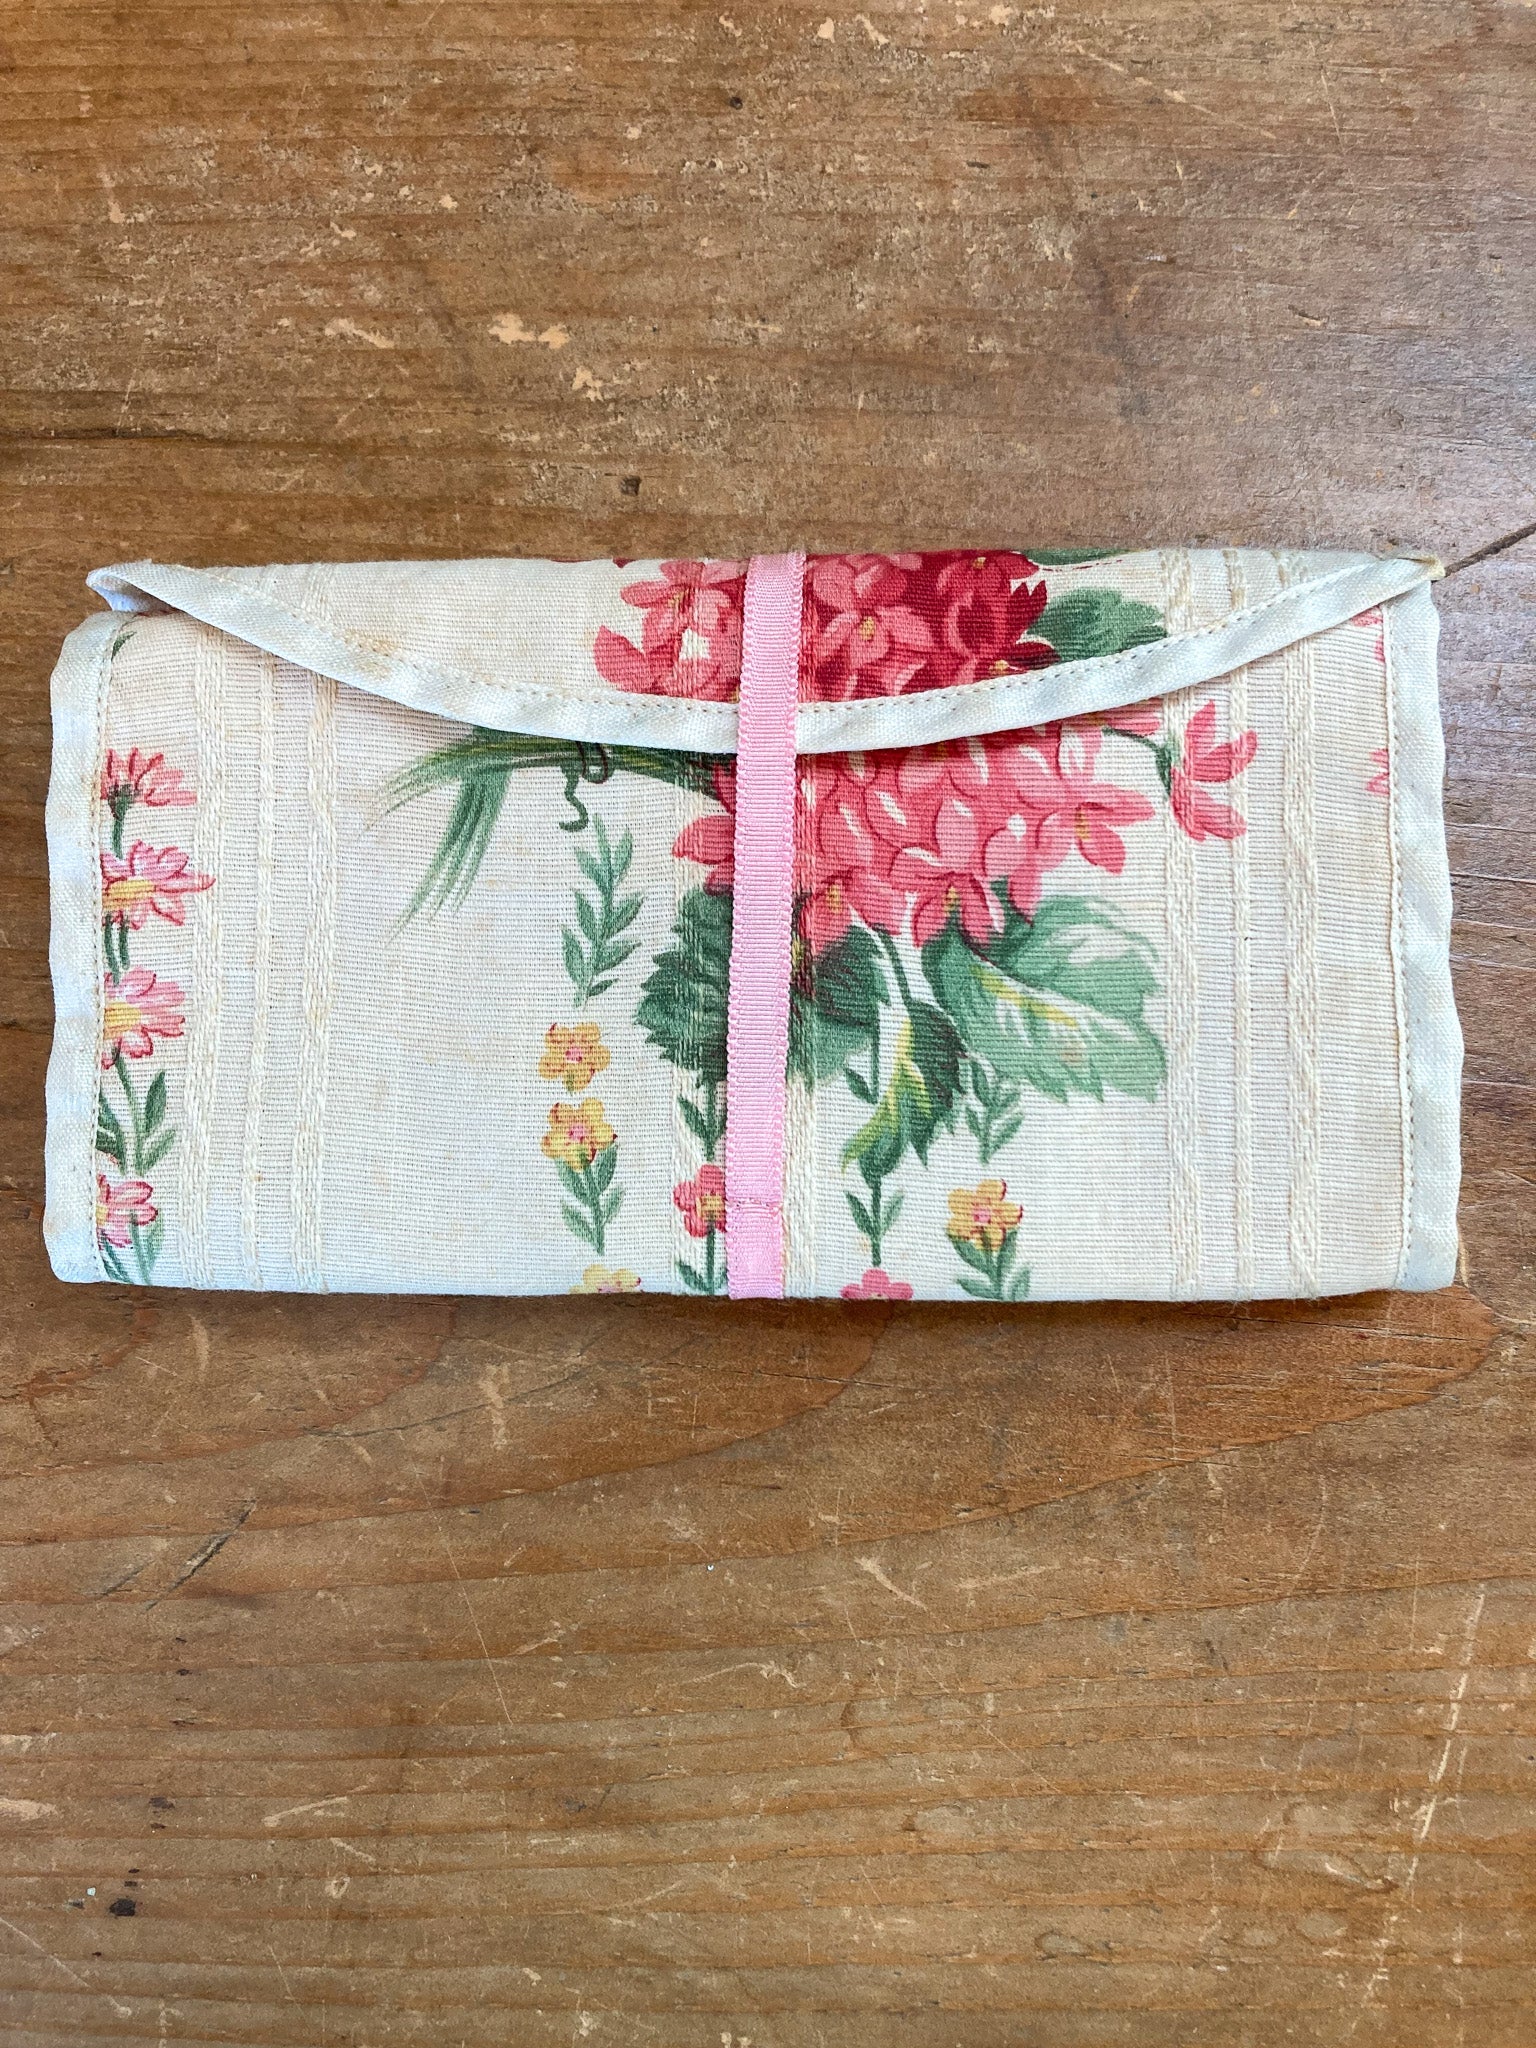 1940’s – 1950’s Vintage Fabric Sewing Clutch